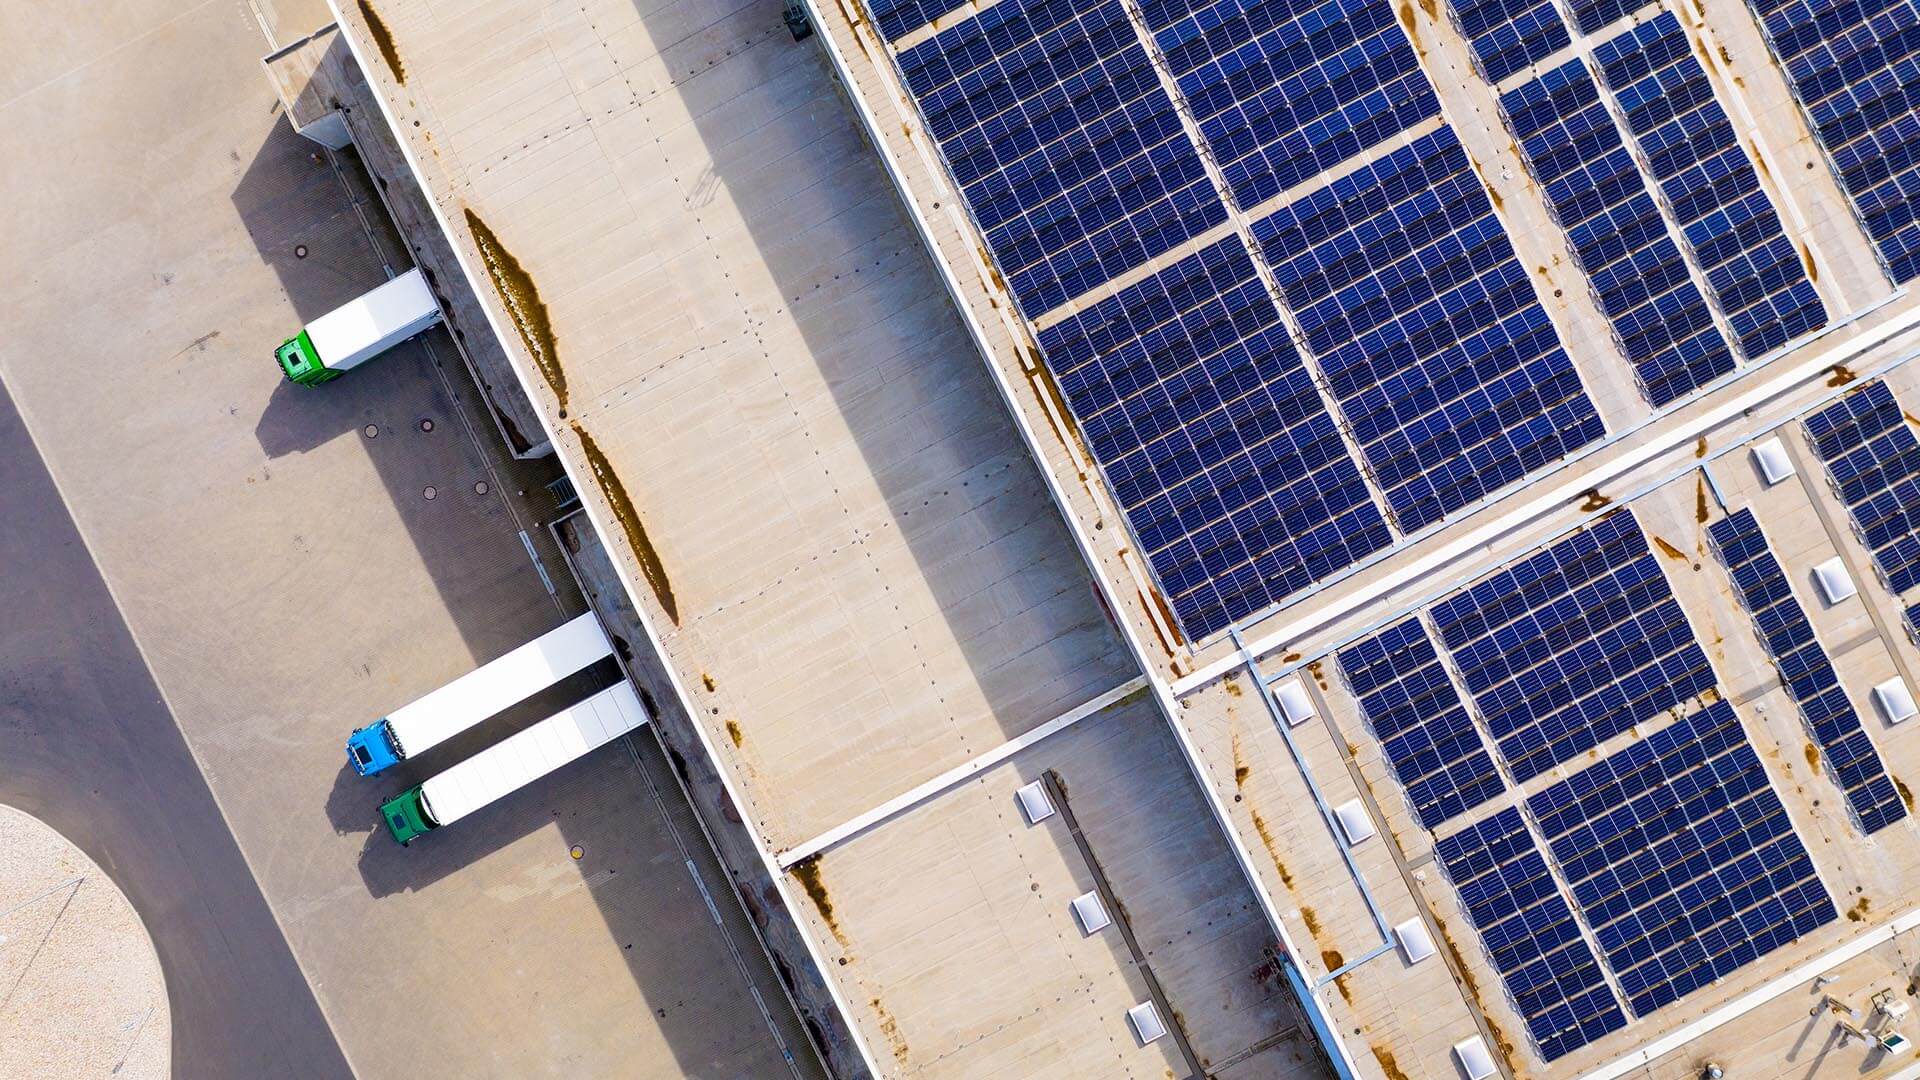 A warehouse rooftop with solar panels in large blocks